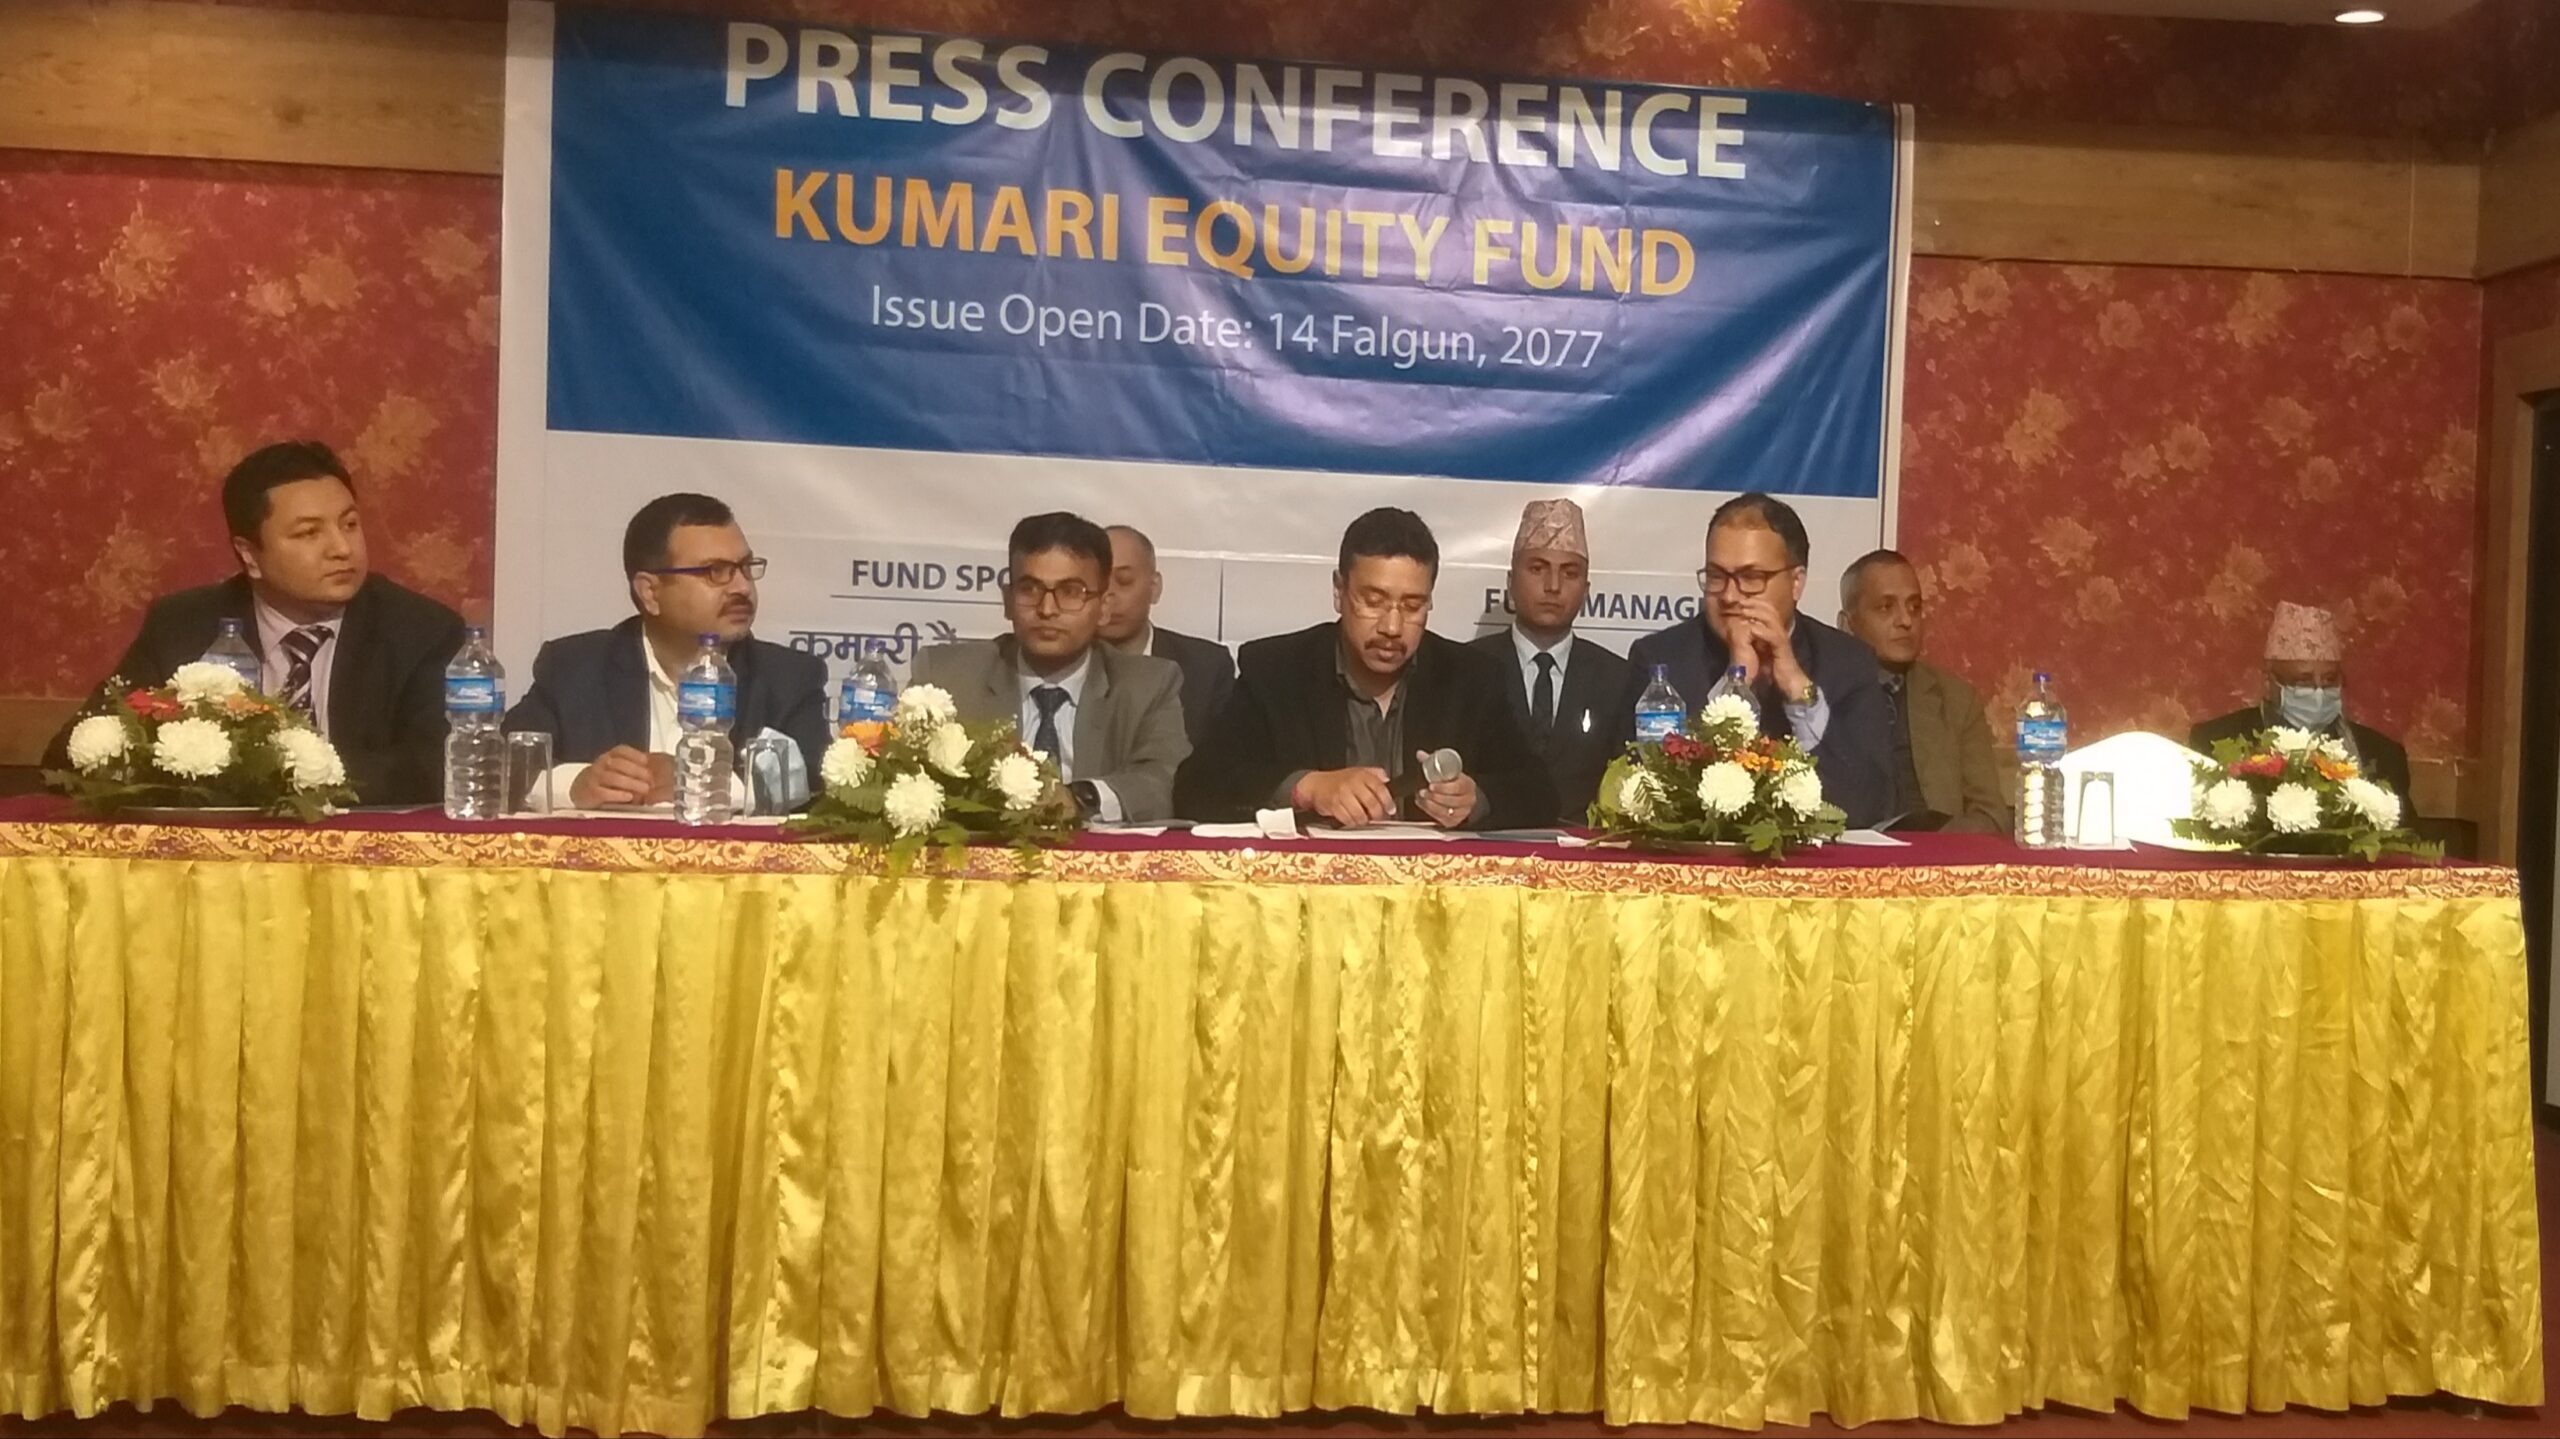 The Rs 800 million ‘Kumari Equity Fund’ is being liquidated from Falgun 14